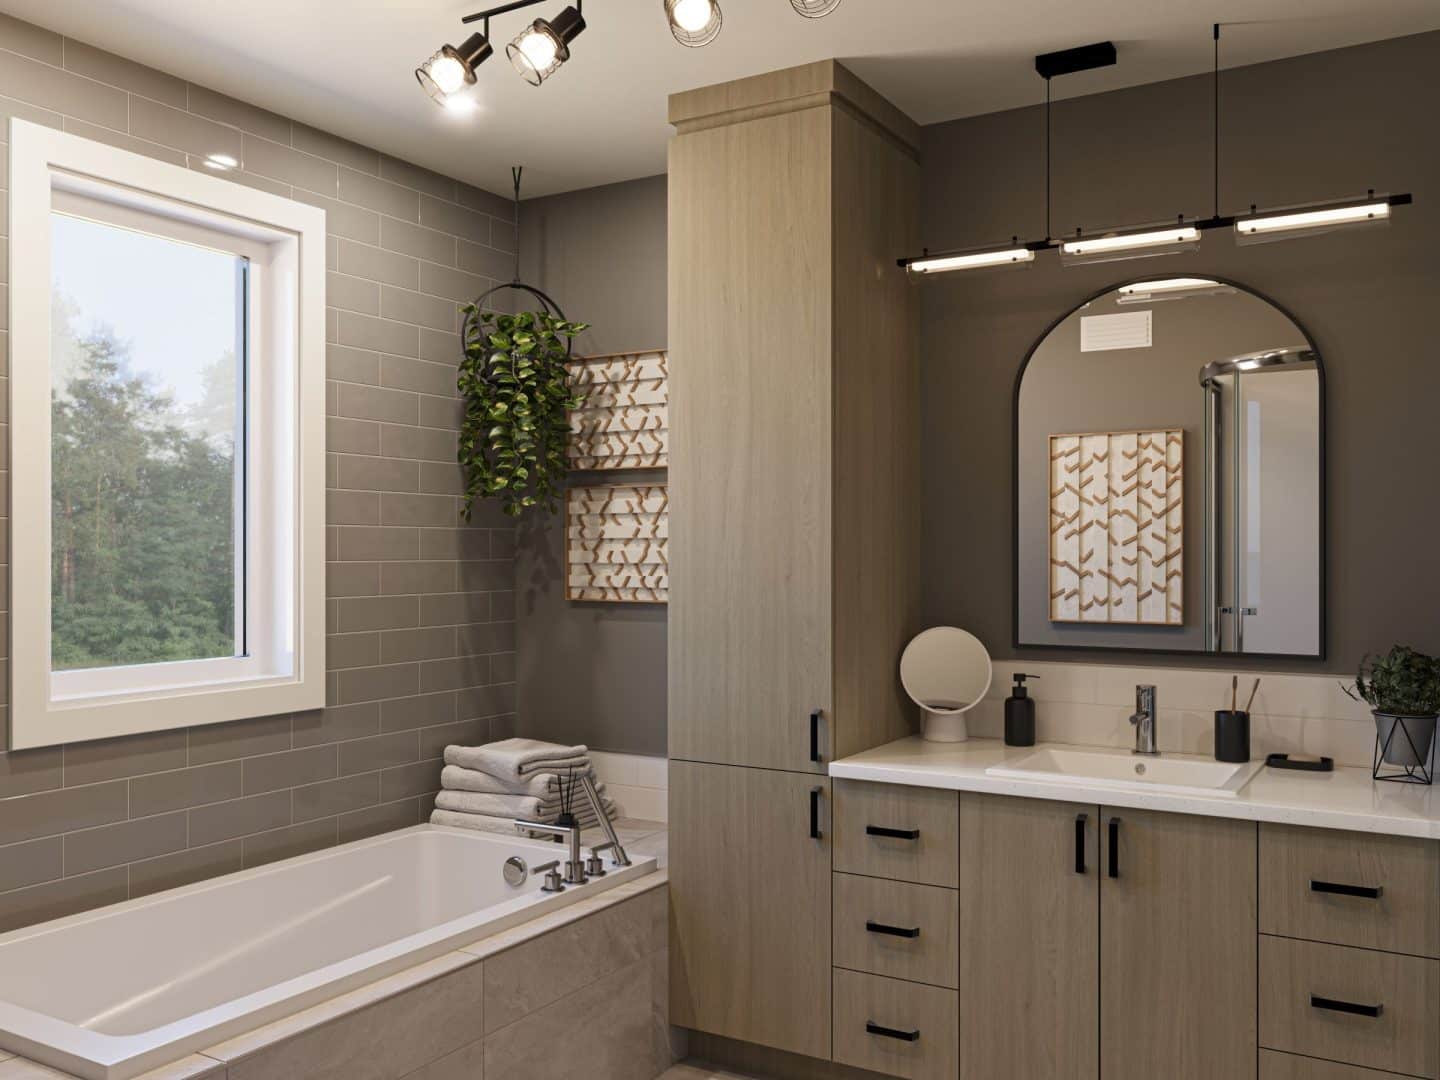 Mignonne model, a single-storey home in the classic style. View of the bathroom.